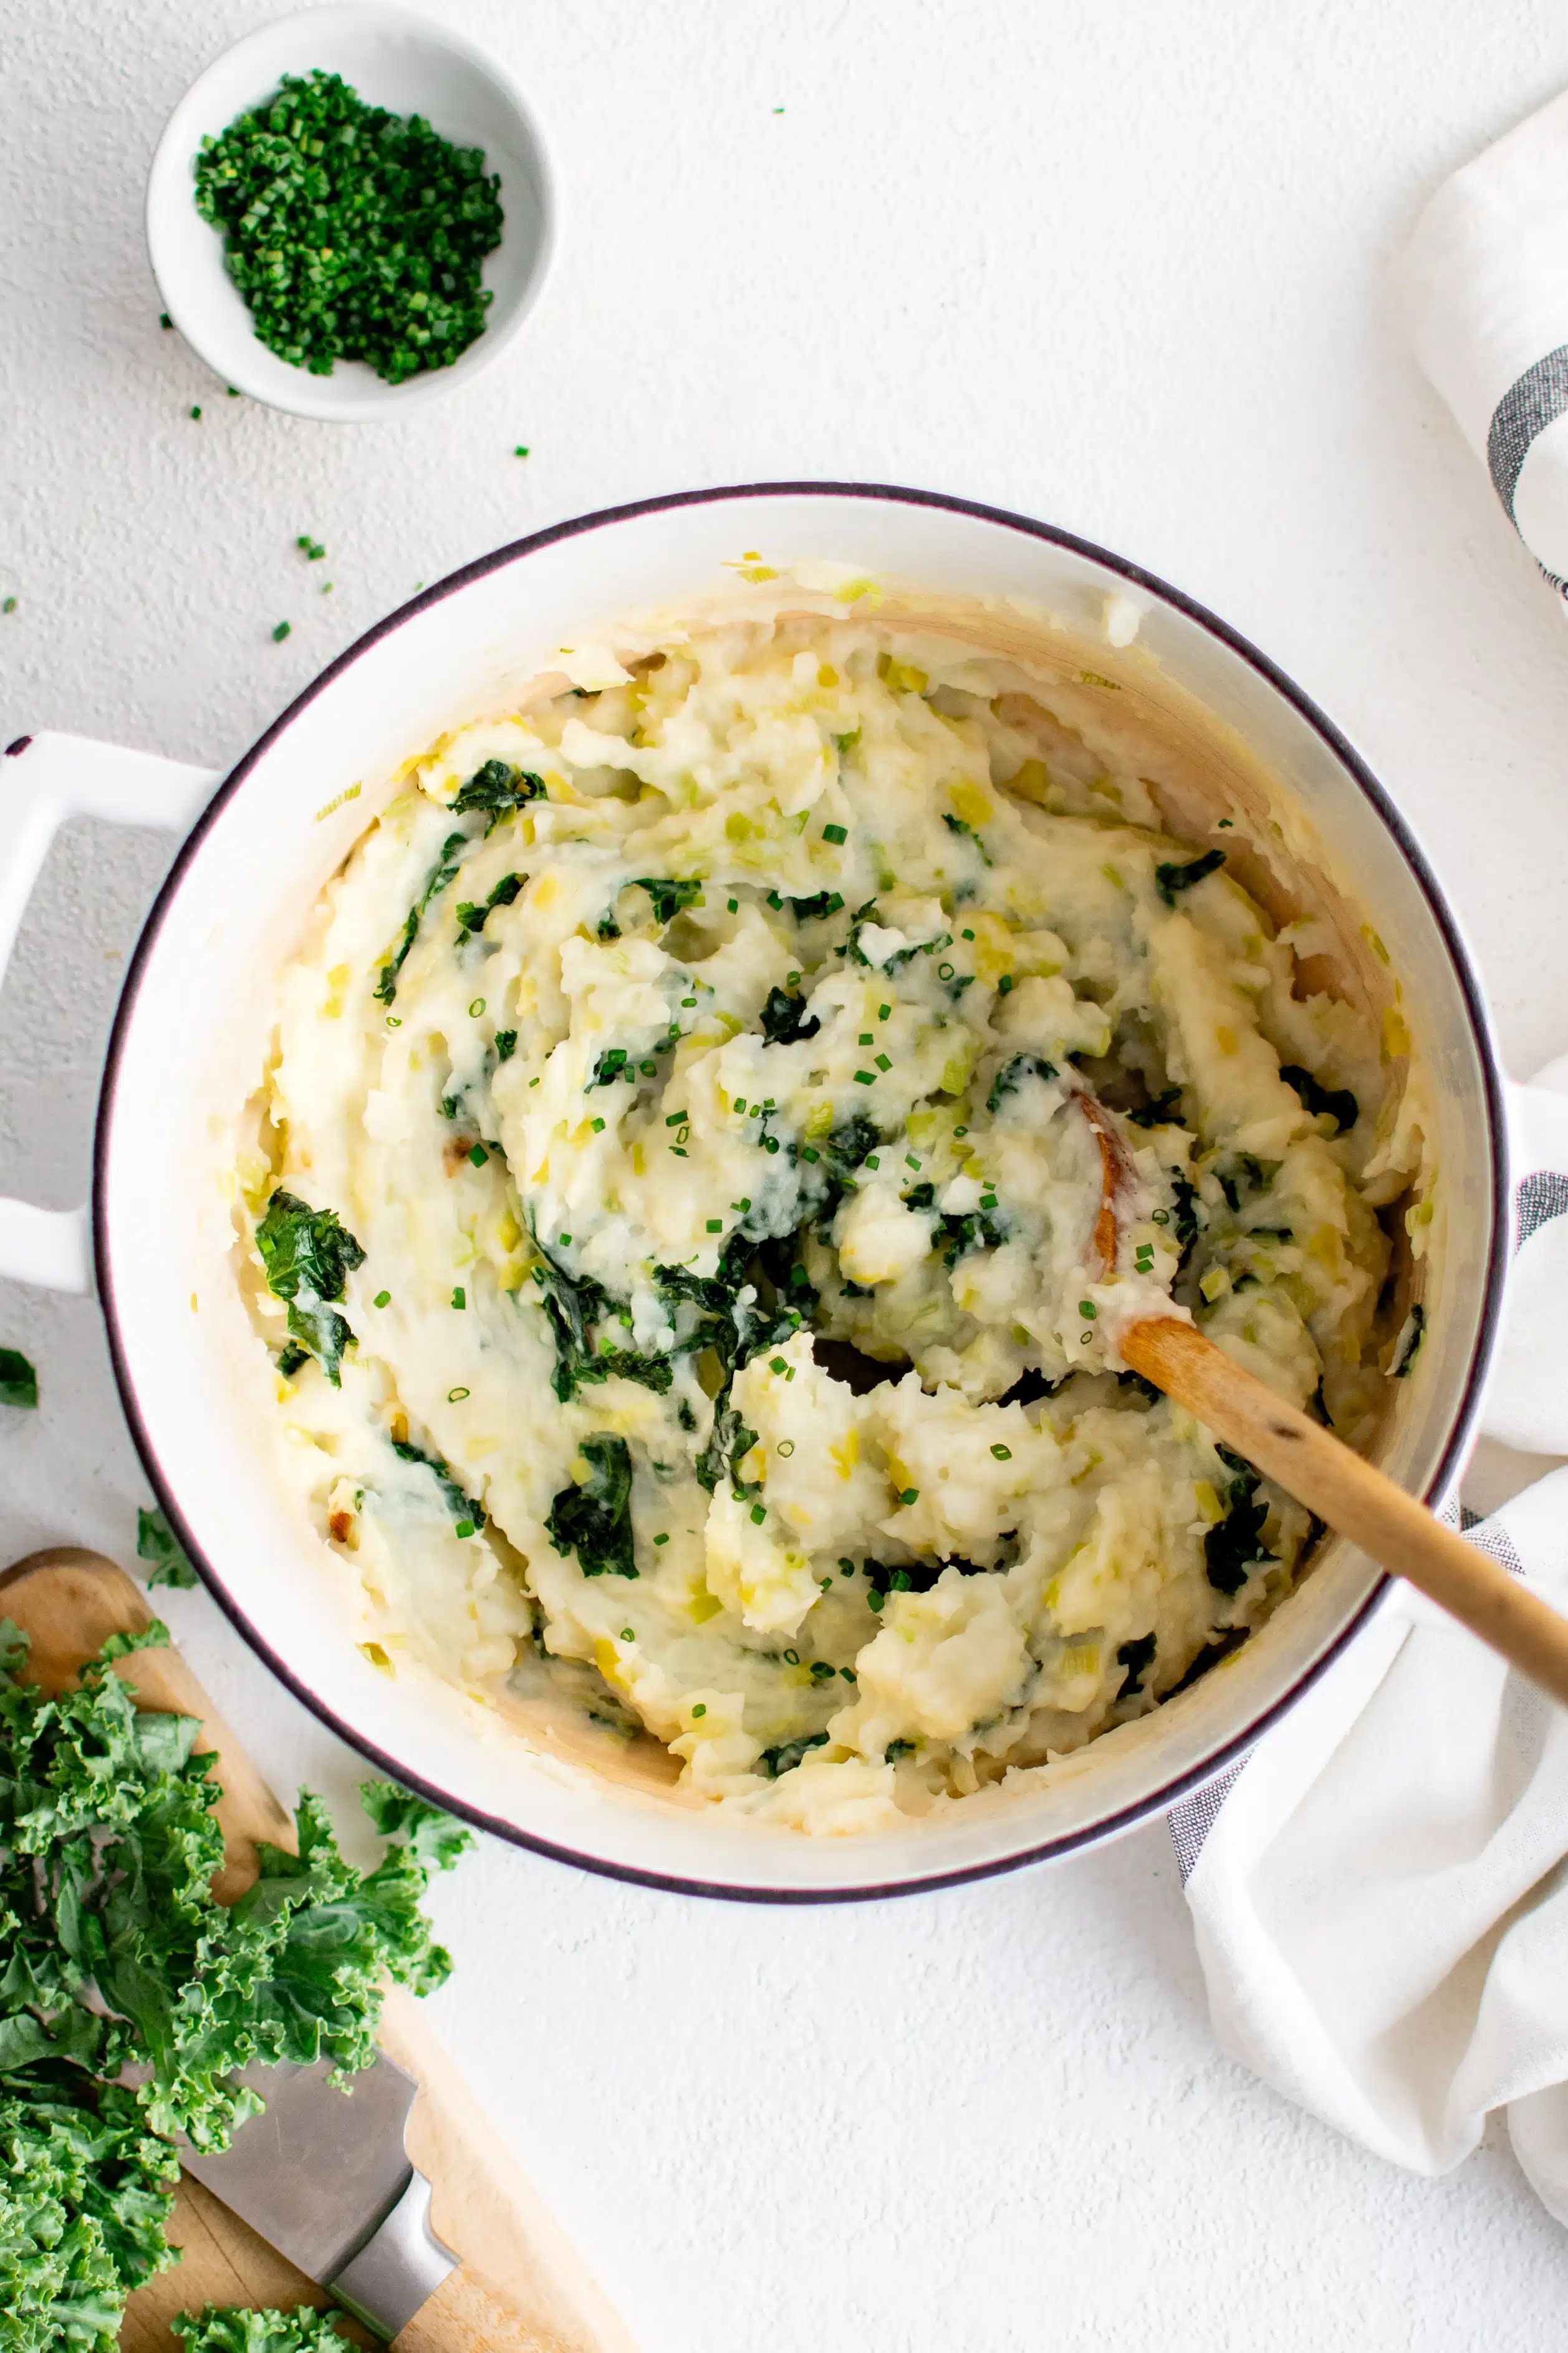 Large white pot filled with creamy mashed colcannon made with mashed potatoes and sauteed kale and leeks.